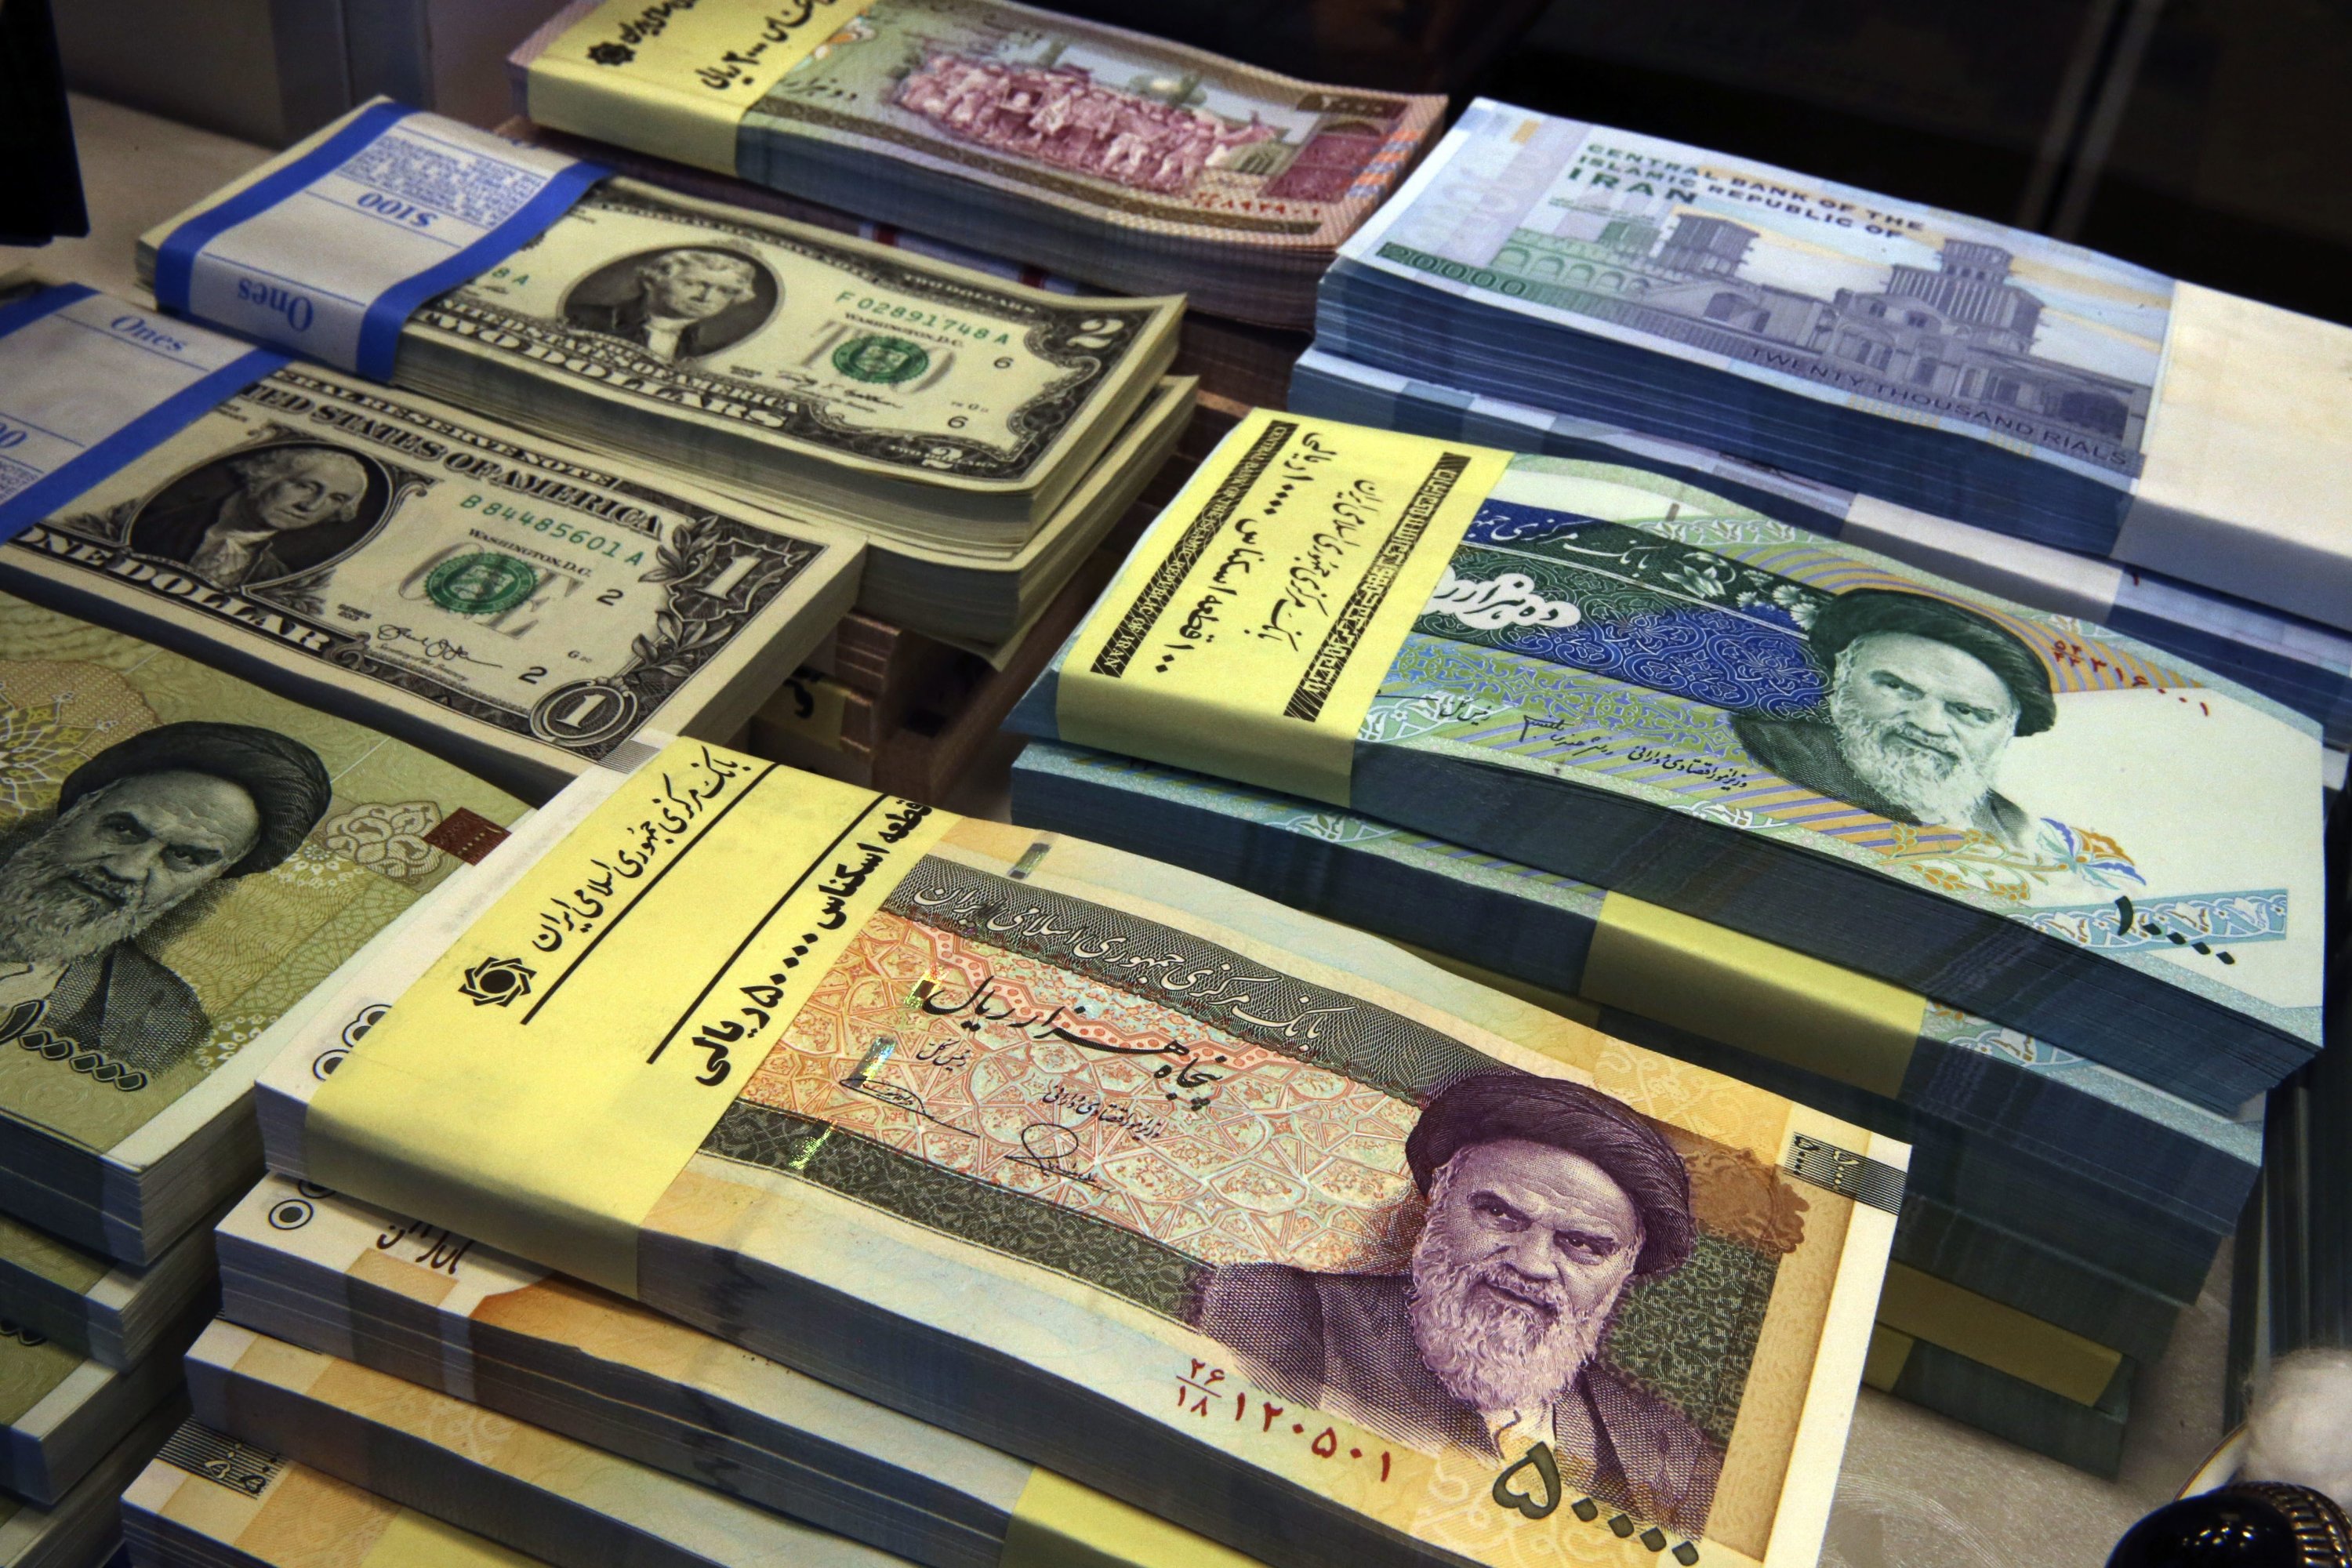 Iran faces record low of national currency after nuclear deal failure